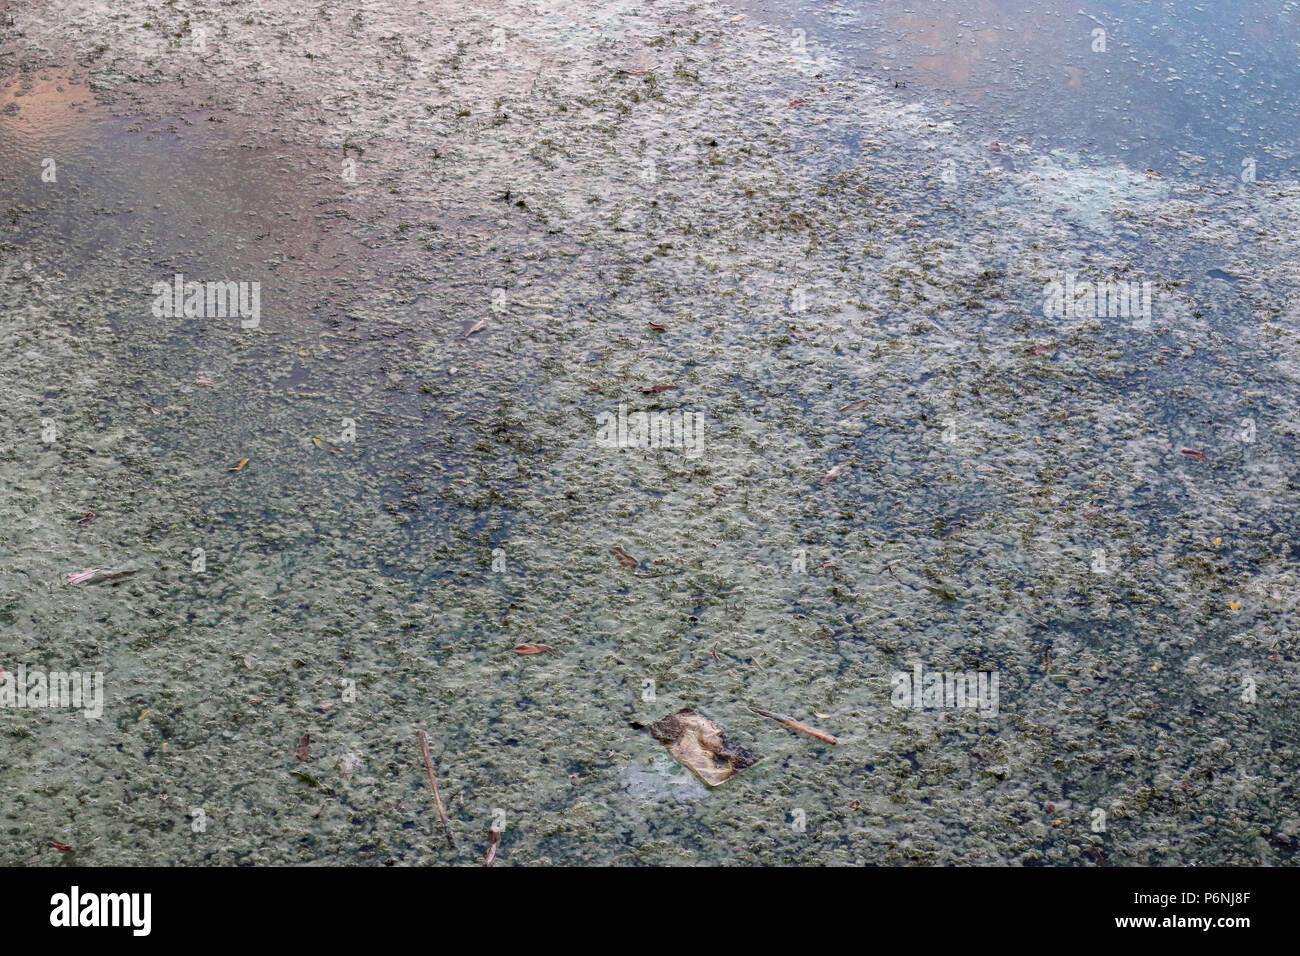 Harmful toxic scum at the side of a freshwater lake. Stock Photo